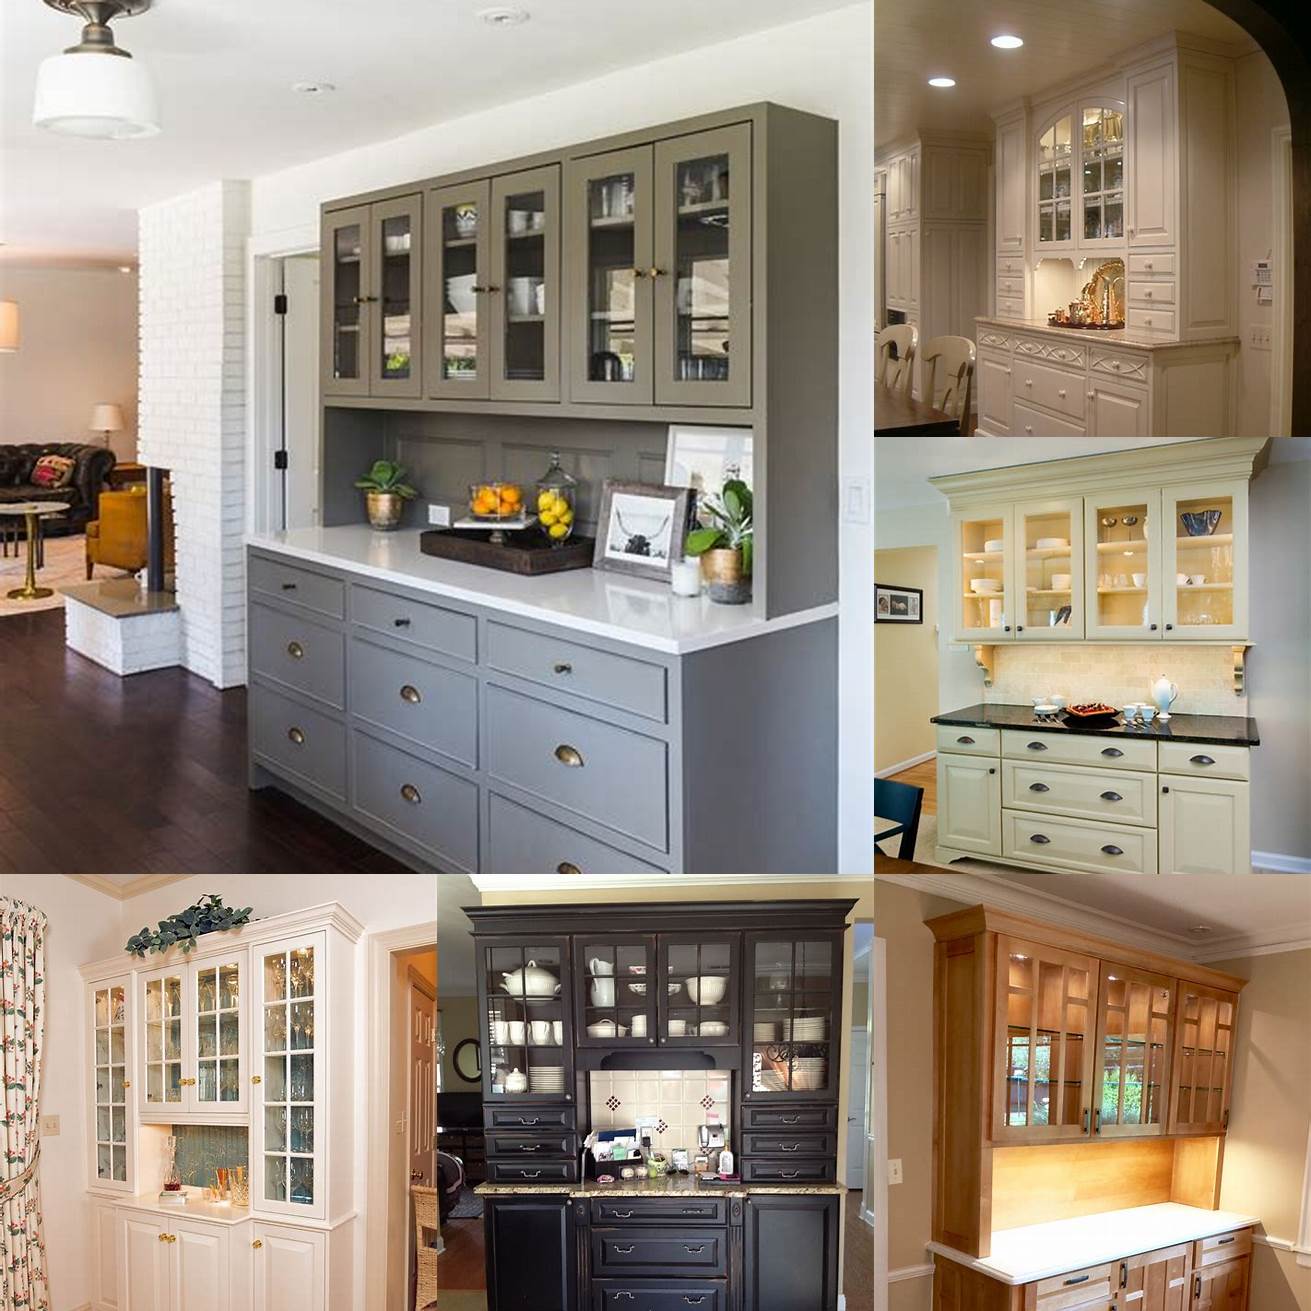 Custom-built hutch with built-in lighting